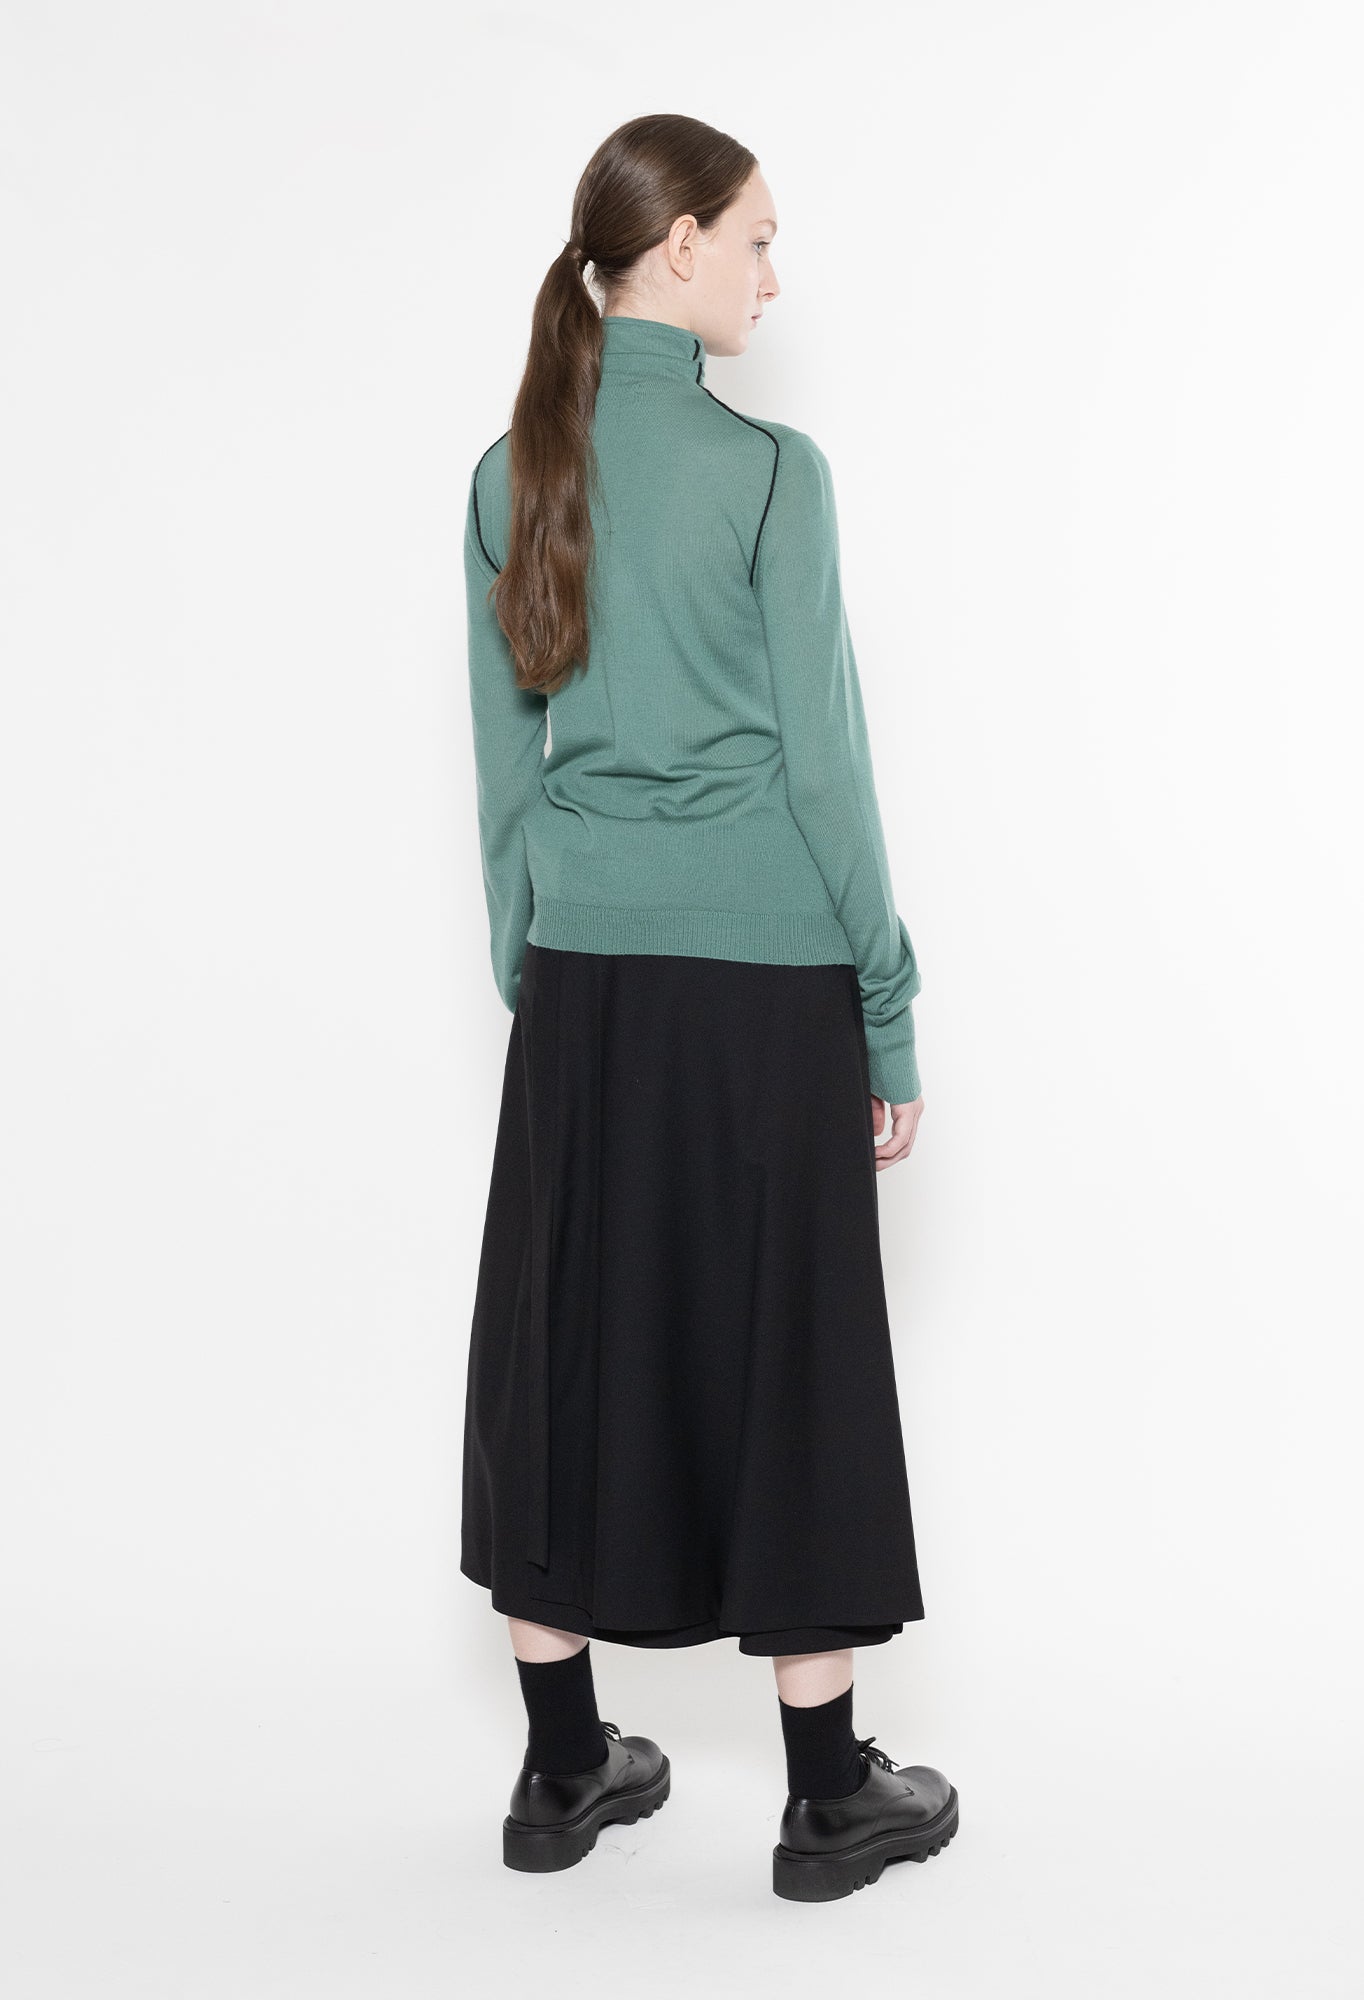 WARA - 16gg Cashmere Turtleneck Sweater in Teal and Black